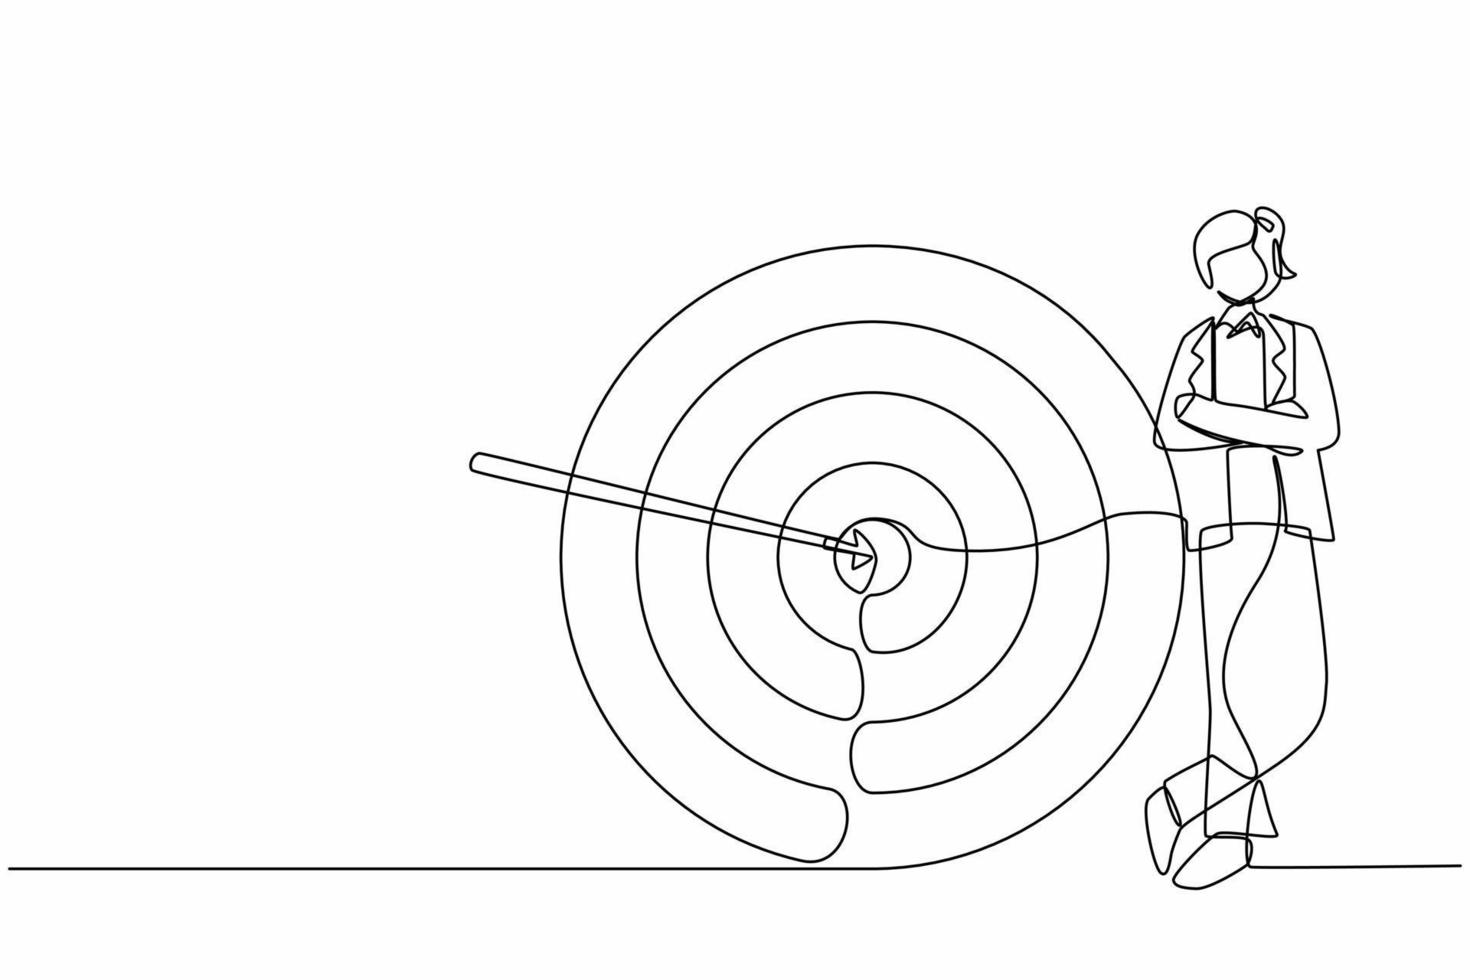 Continuous one line drawing businesswoman or manager standing next to target. Arrow hit target exactly. Successful business strategy, marketing concept. Single line design vector graphic illustration